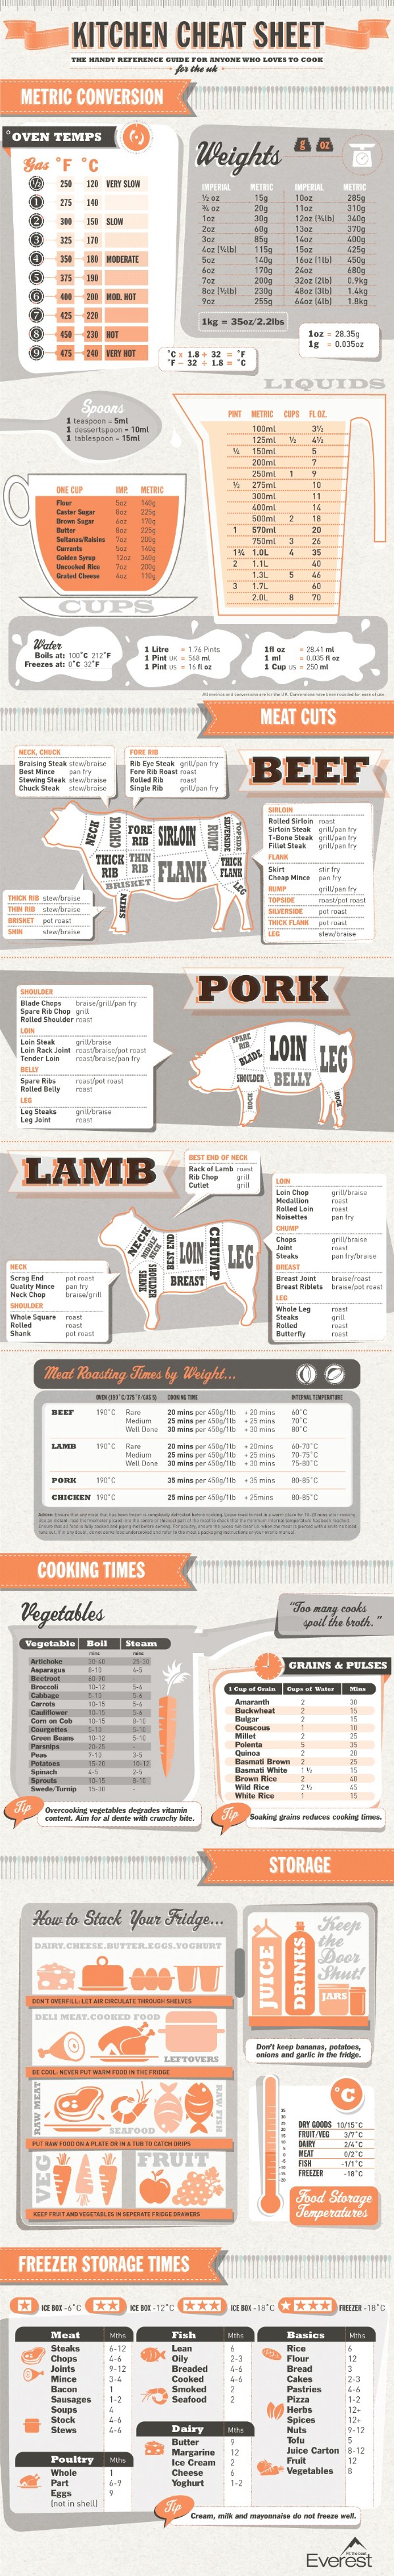 Everything Sheet - 18 Professional Kitchen Infographics to Make Cooking Easier and Faster